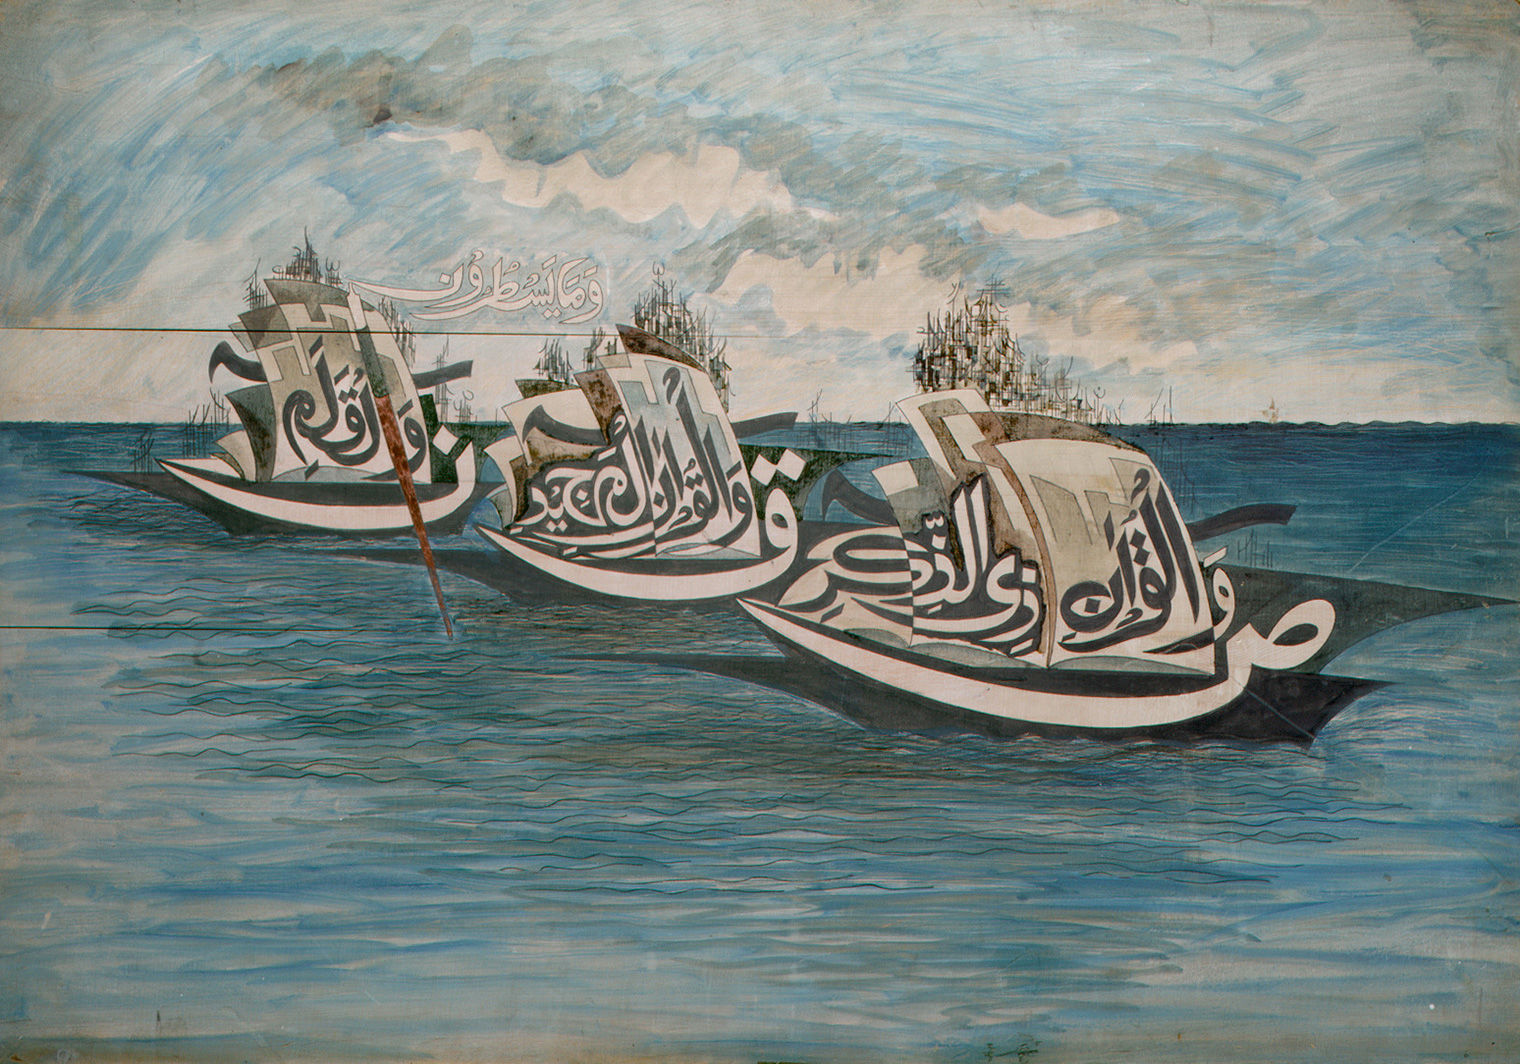 Painting of three ships at sea. Shades of blue accent the sea and the sky, while the ships are painted in black and white, with calligraphy in Urdu script marking the sails.